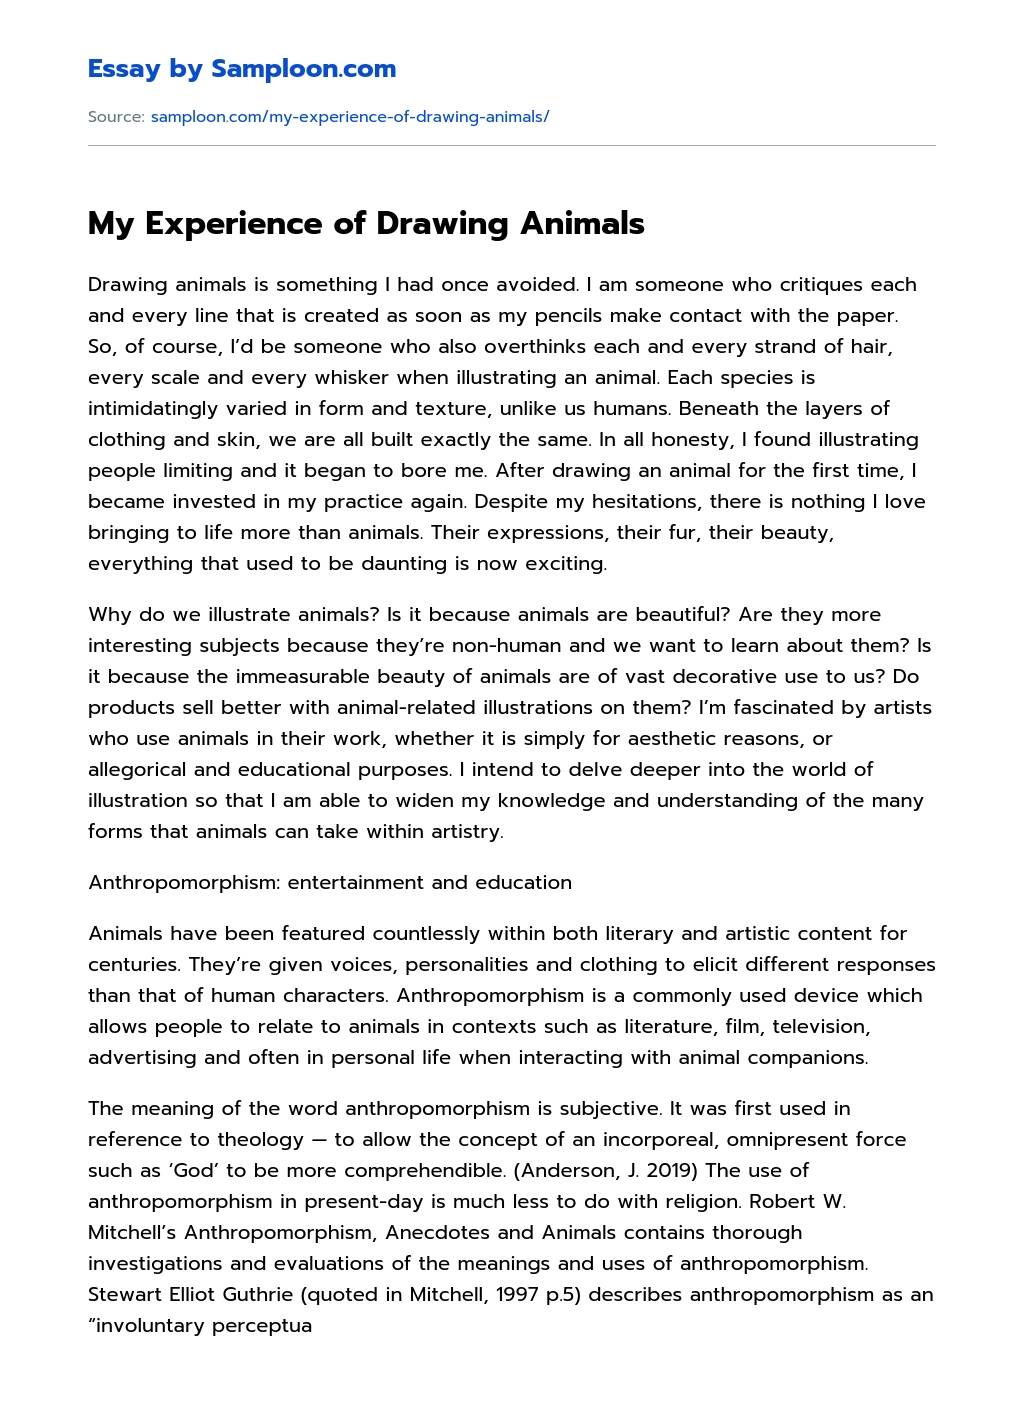 My Experience of Drawing Animals essay